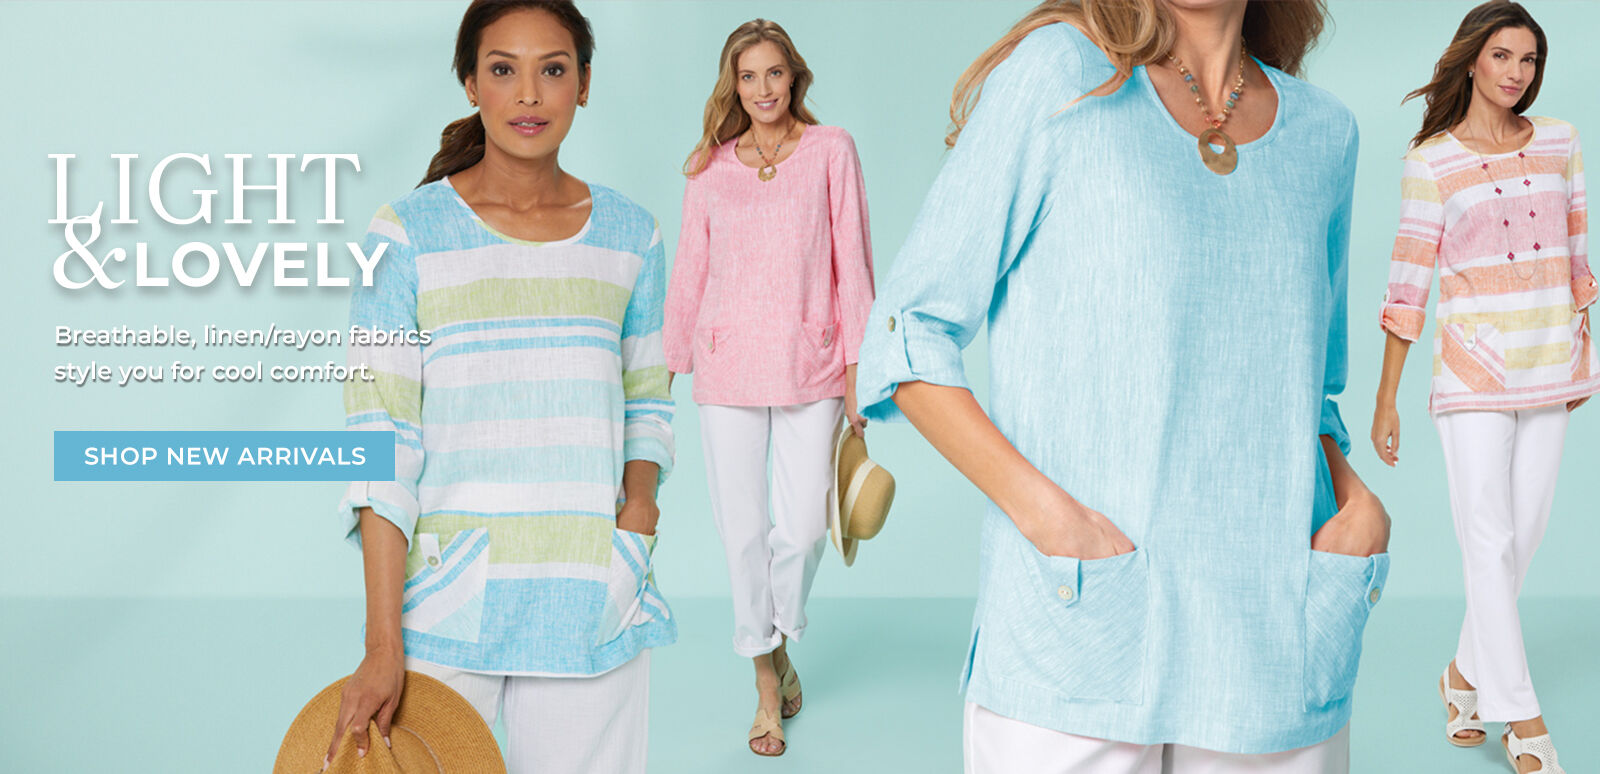 light & lovely breathable, linen/rayon fabrics style you for cool comfort. shop new arrivals